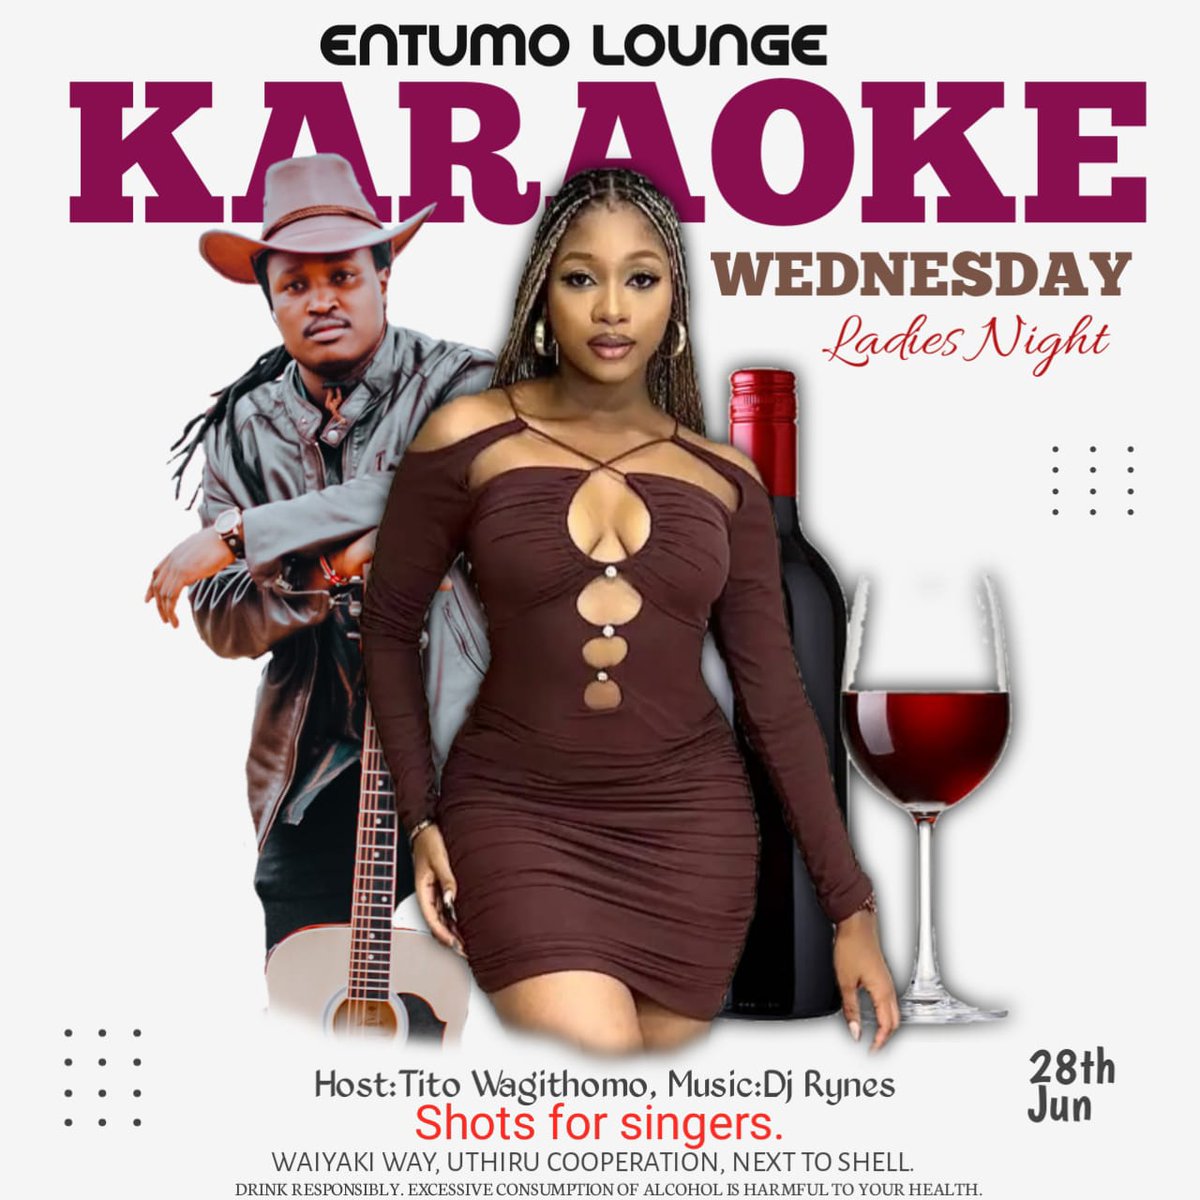 💥It's all about the gorgeous divas this Karaoke Wednesday Ladies Night💃 💥Get ready for a fun-filled&craziest night🥰🥳 Entumo Lounge ⏩Another Place.........Another World⏪ #entumo254 #entumolounge #waiyakiwaysfinest #ladiesnightkaraoke💃🏾🎤